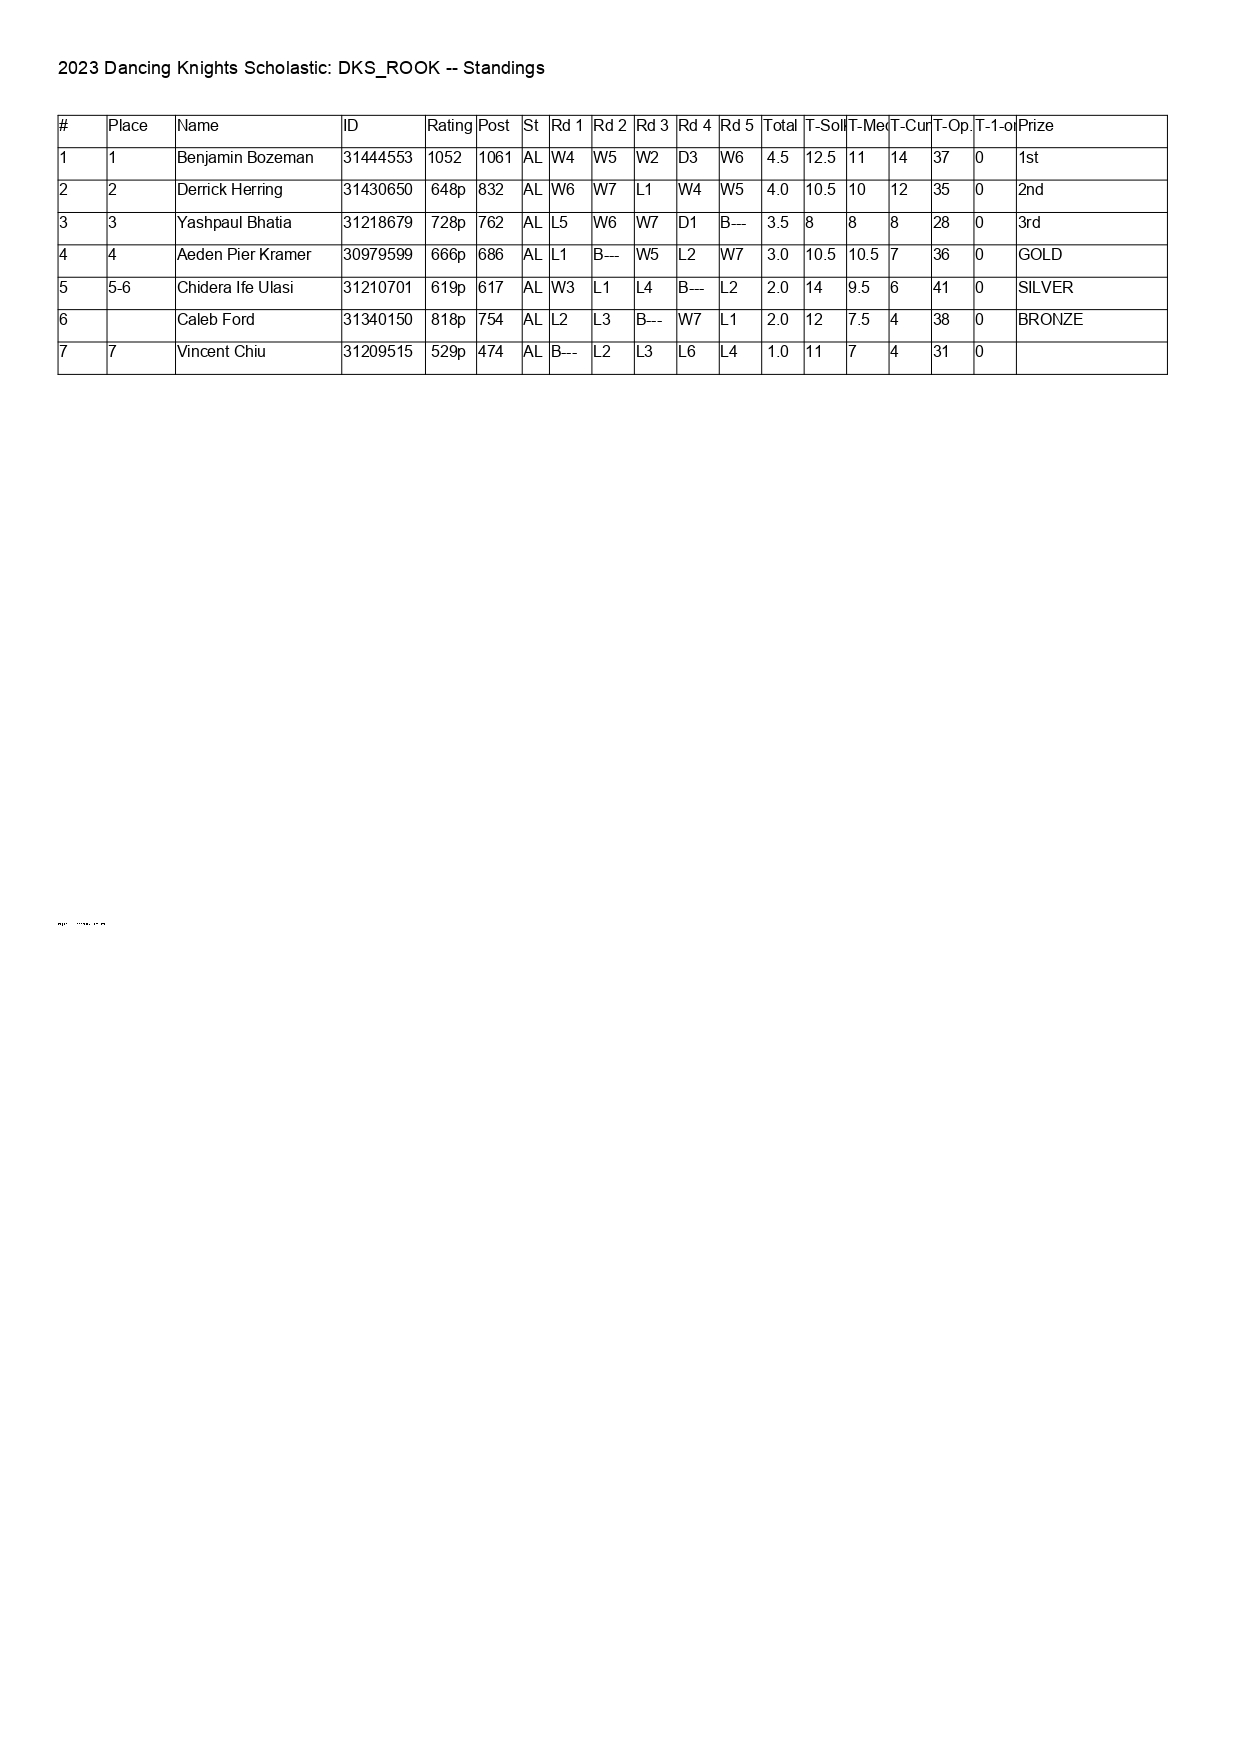 DKS_ROOK Standings Rd 5_page-0001